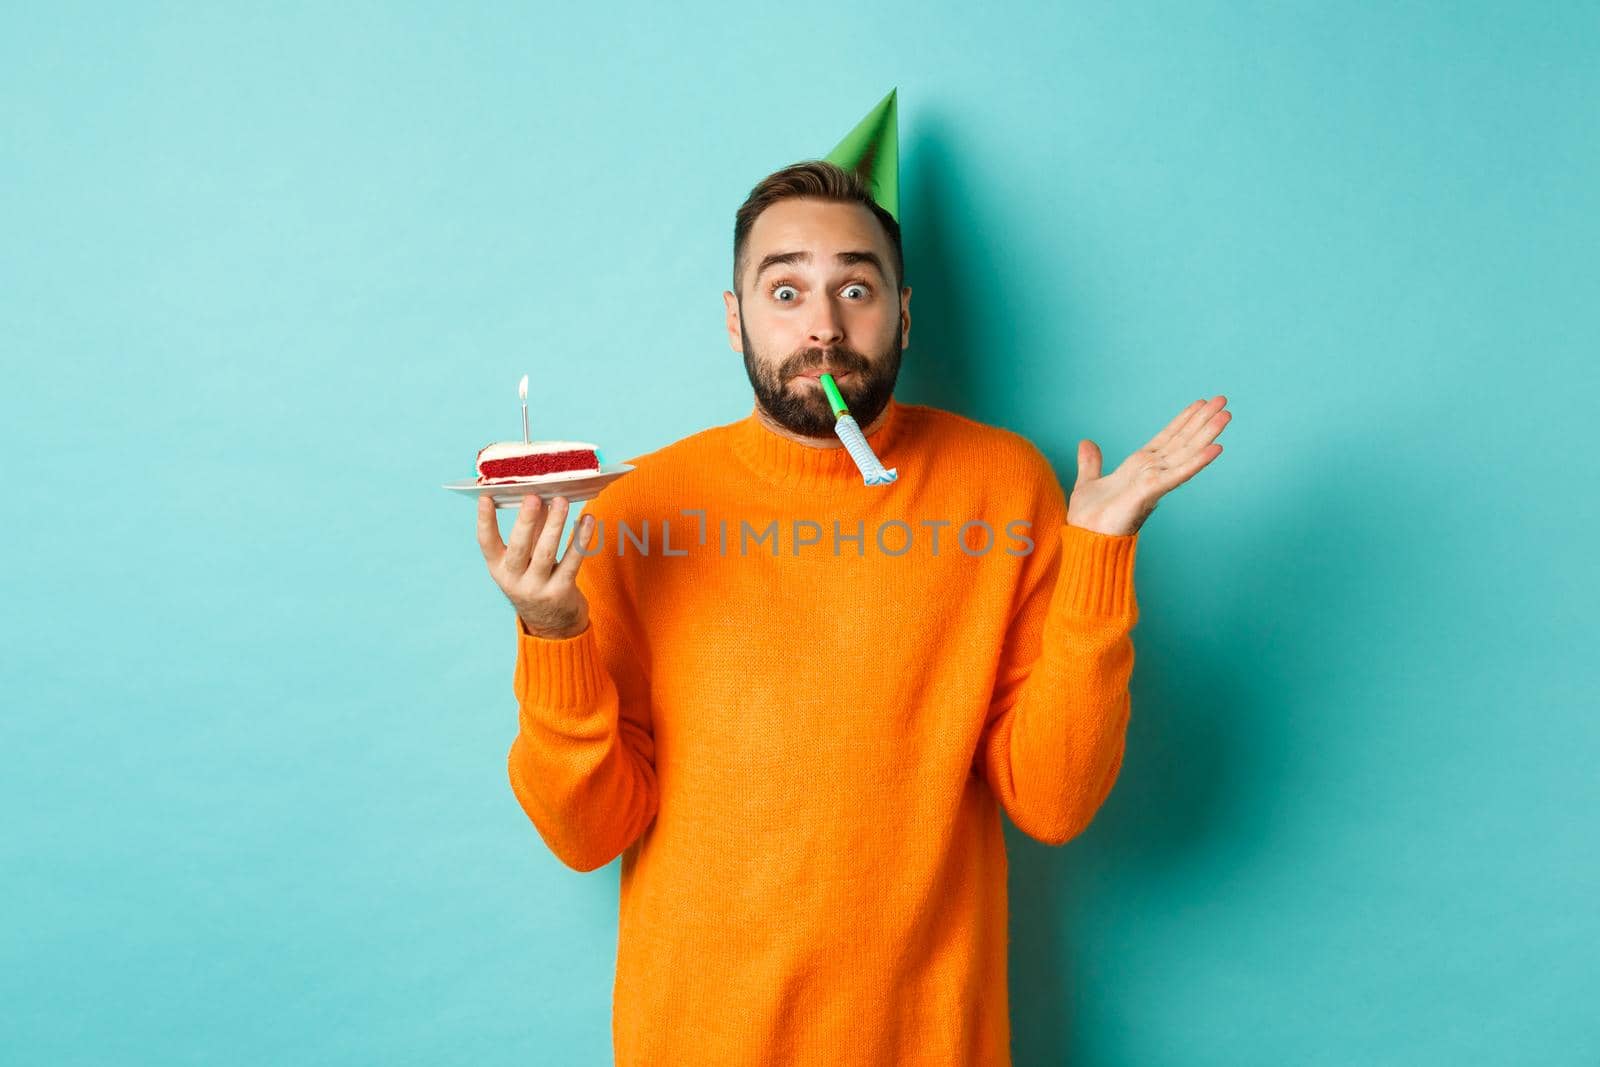 Happy birthday guy celebrating, wearing party hat, blowing wistle and holding bday cake, standing against white background by Benzoix